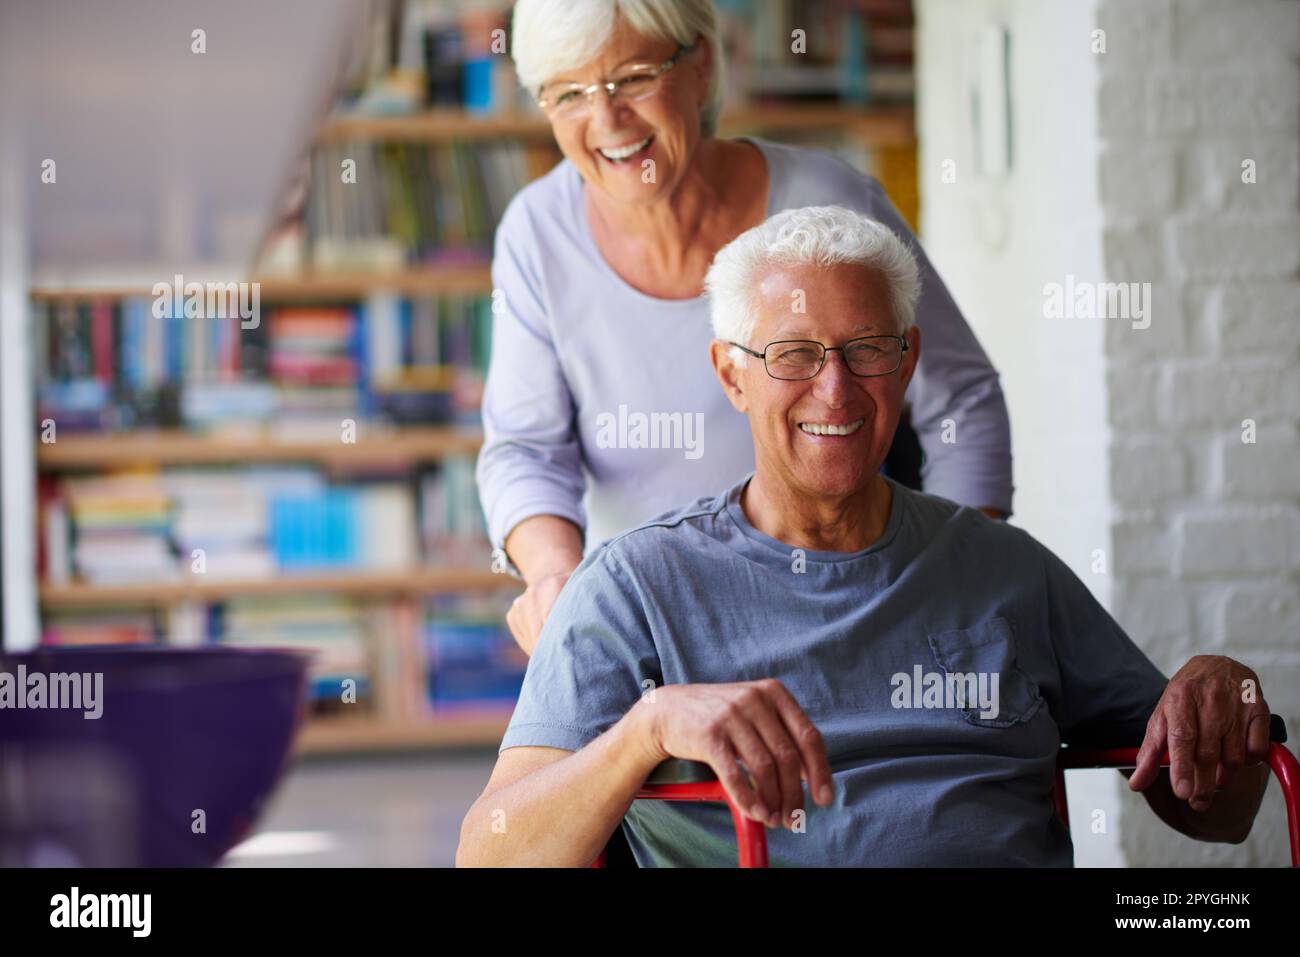 Our lives are full of joy. Portrait of a happy senior man in a wheelchair being helped by his wife. Stock Photo